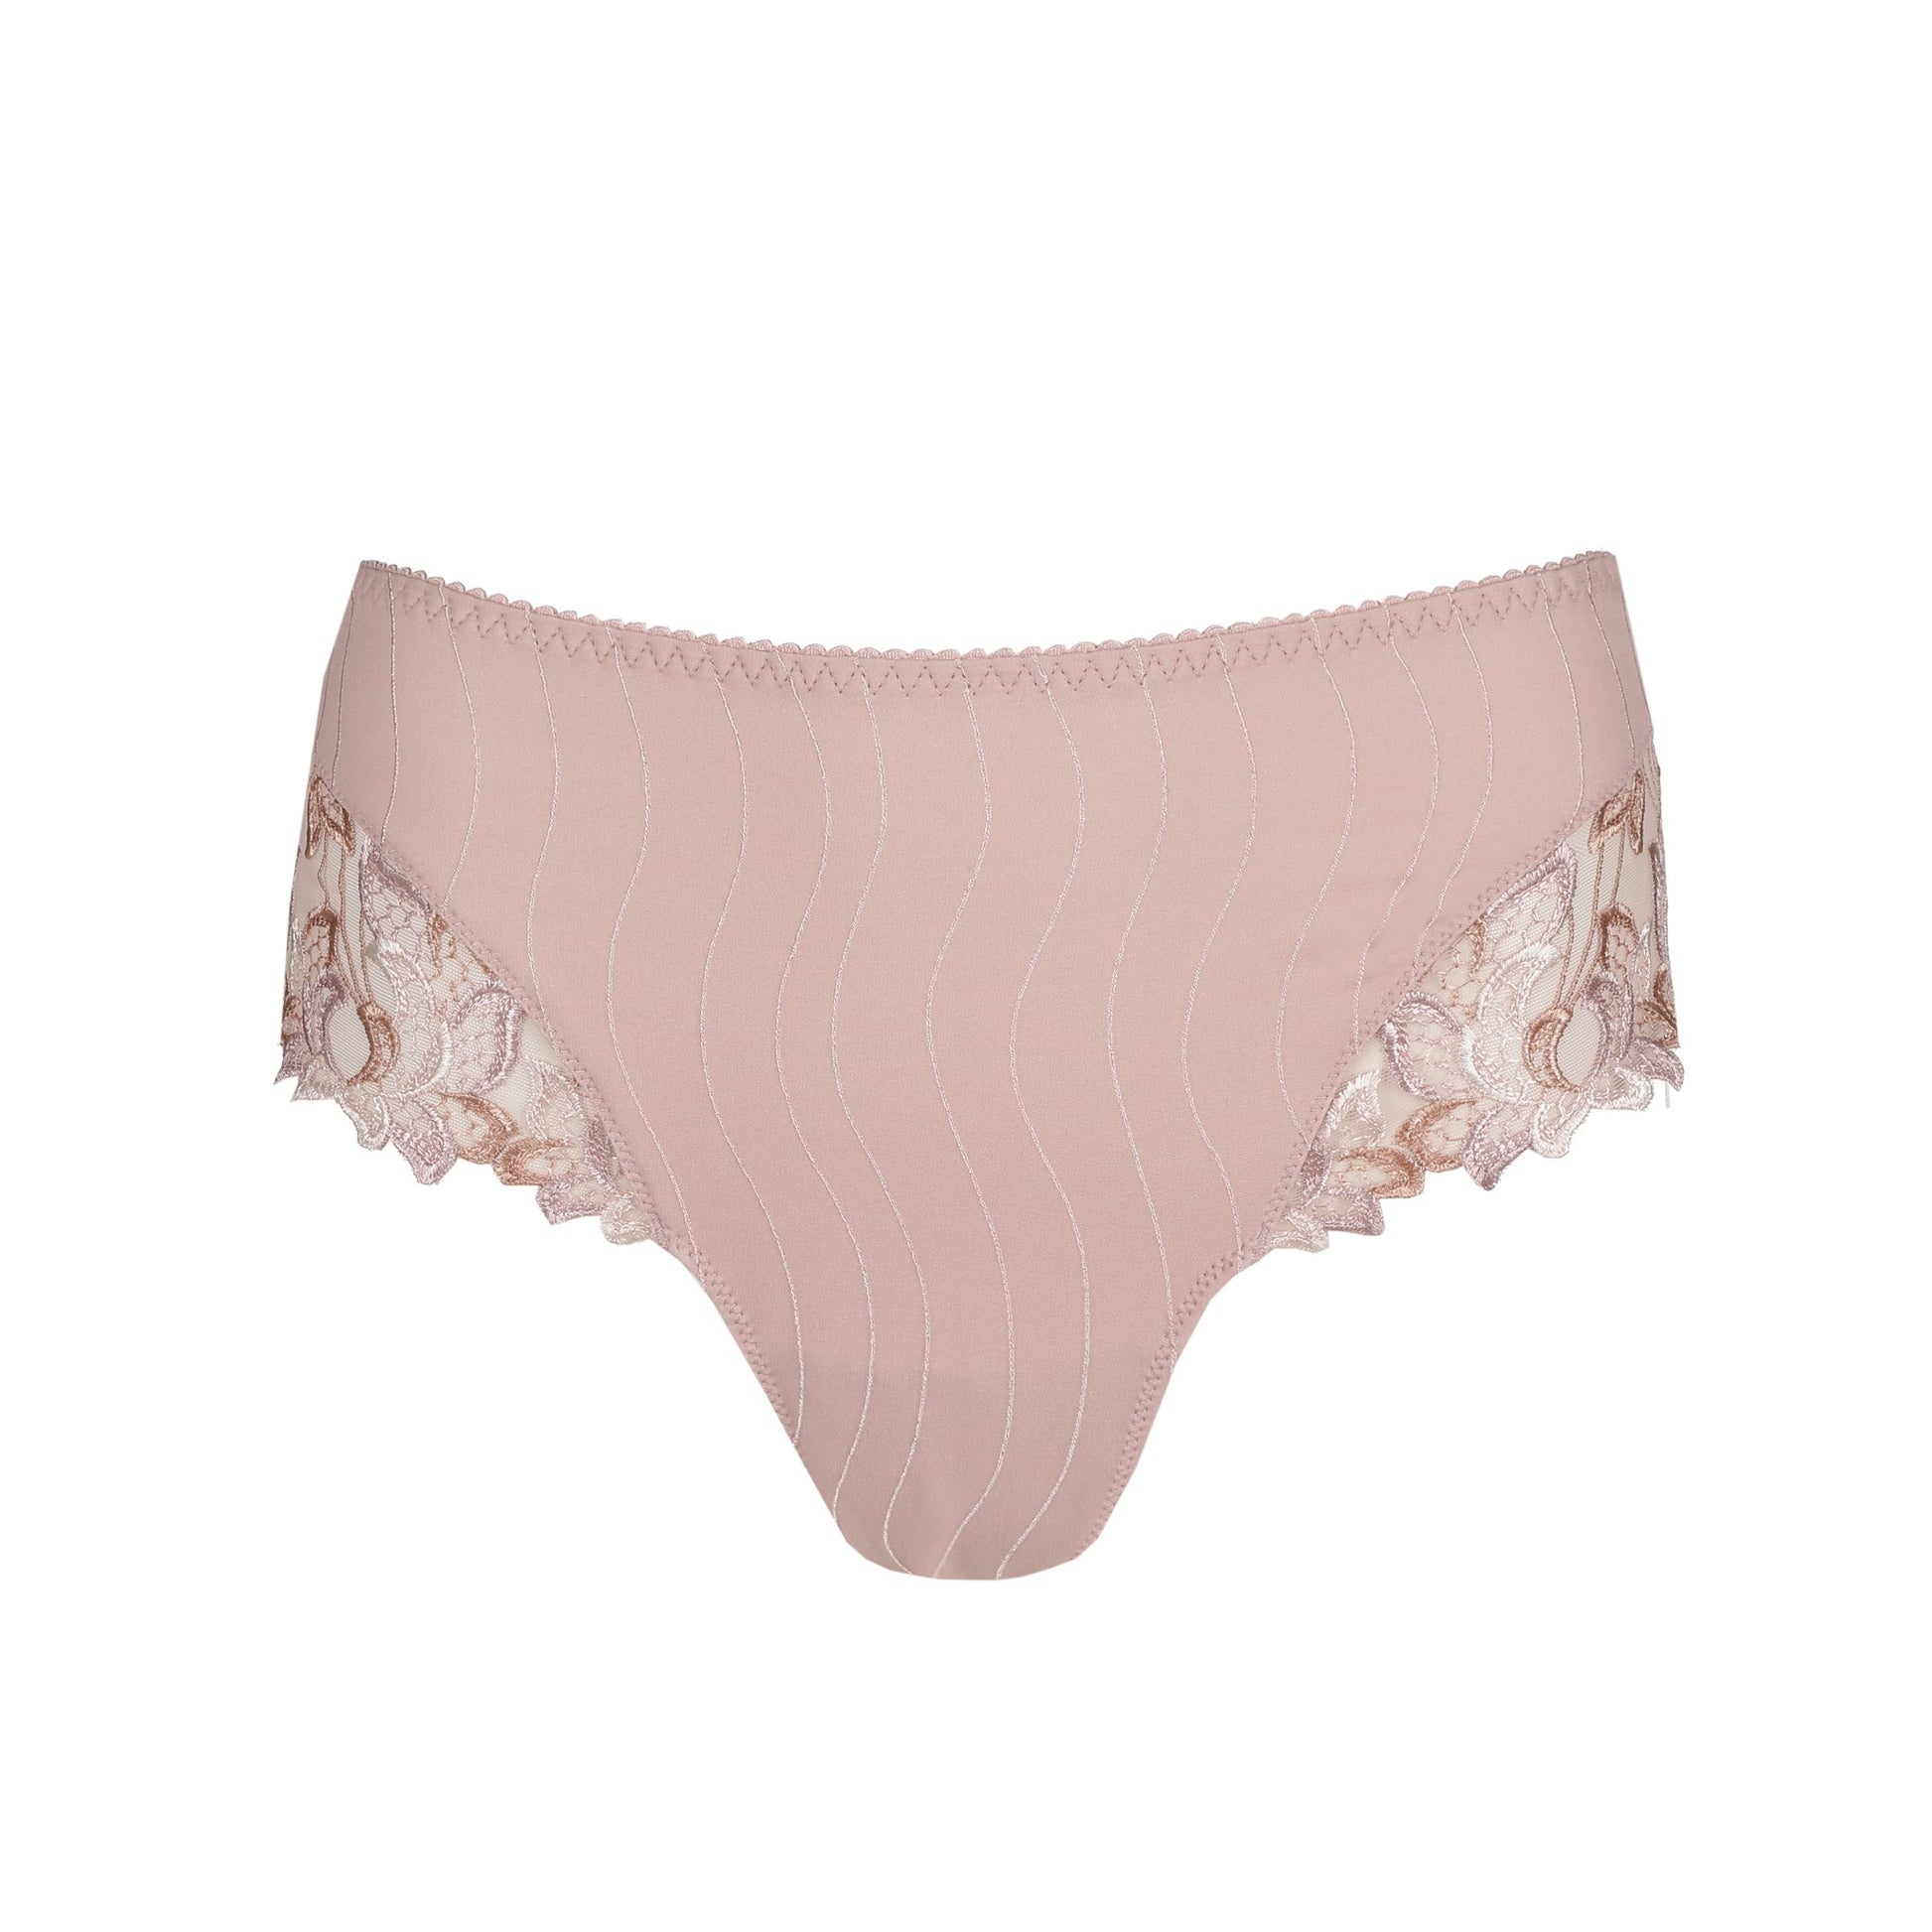 Deauville Luxury Thong with elegant lace in Vintage Pink by Primadonna.